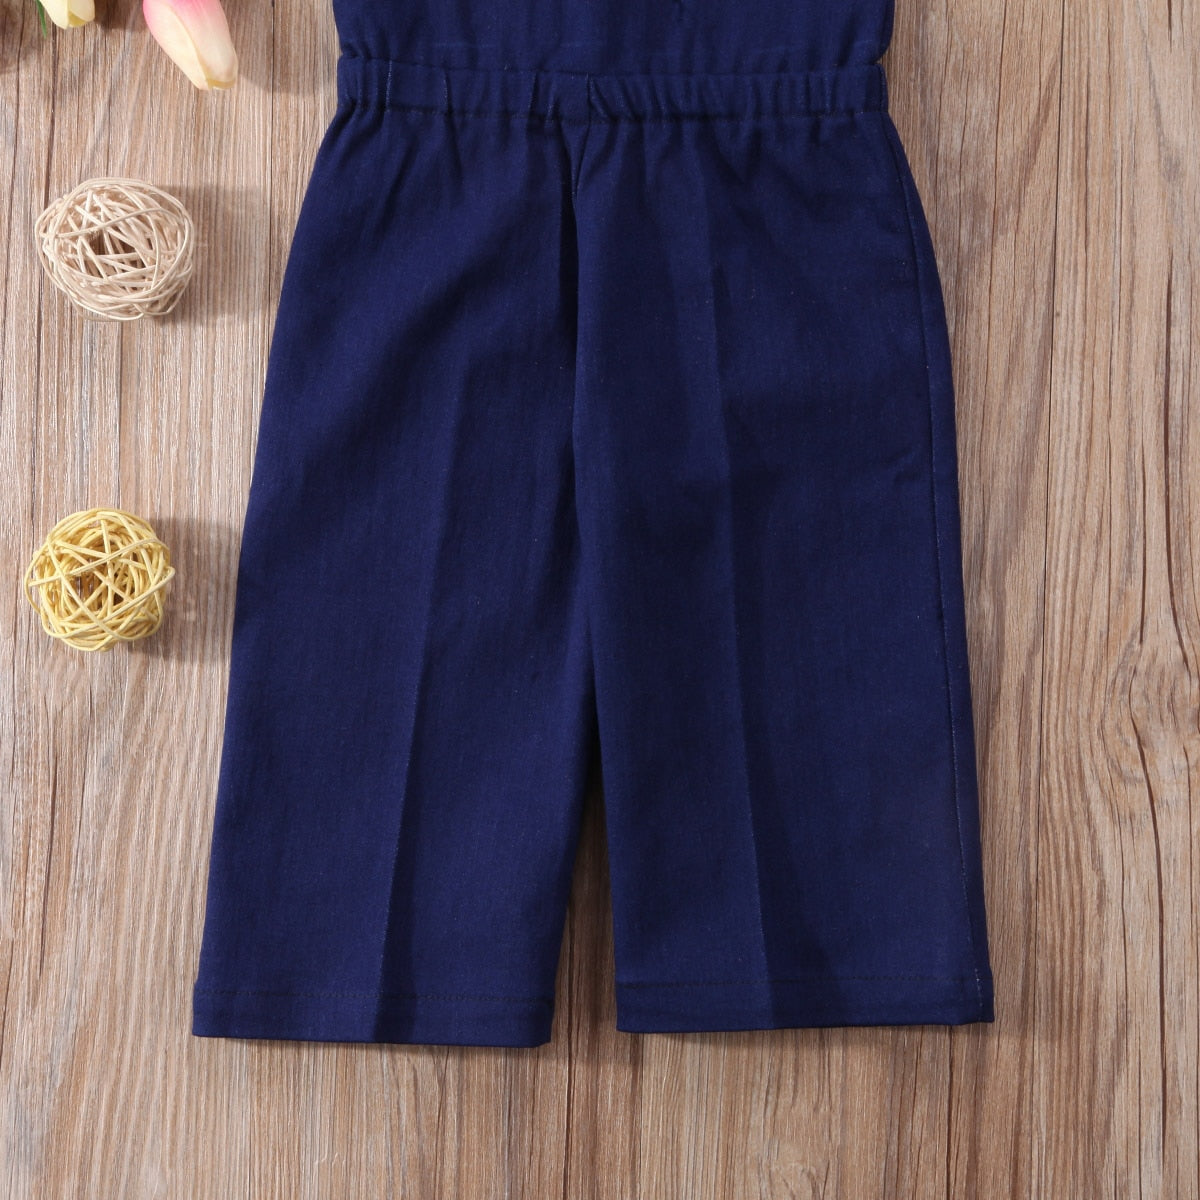 Sleeveless Baby Girls Denim Strap Romper Jumpsuit Outfits  Overalls Set Clothes Summer 1-7T - ebowsos